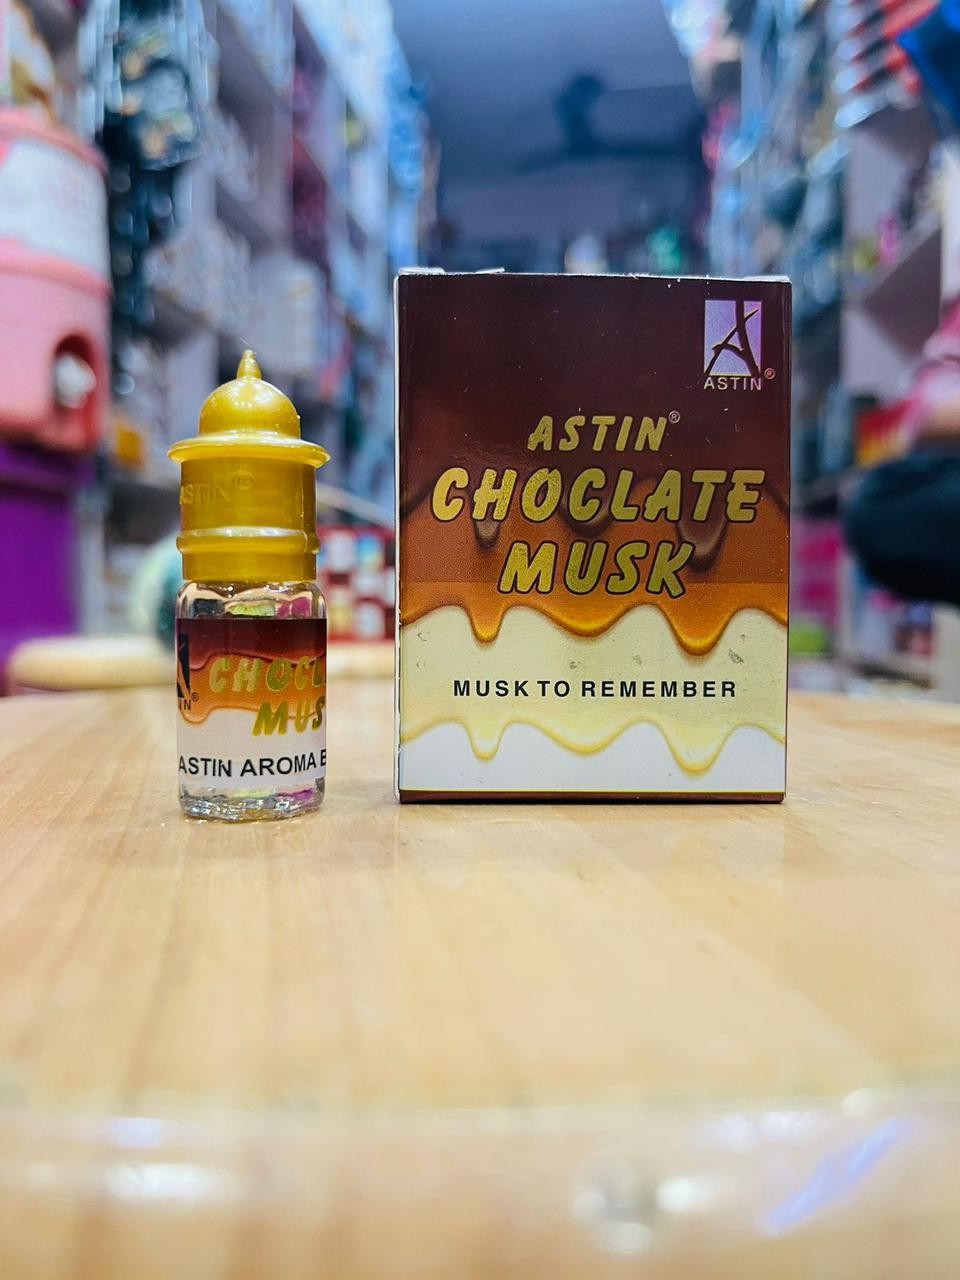 ASTIN choclate musk to remember perfume alcohol-free attar